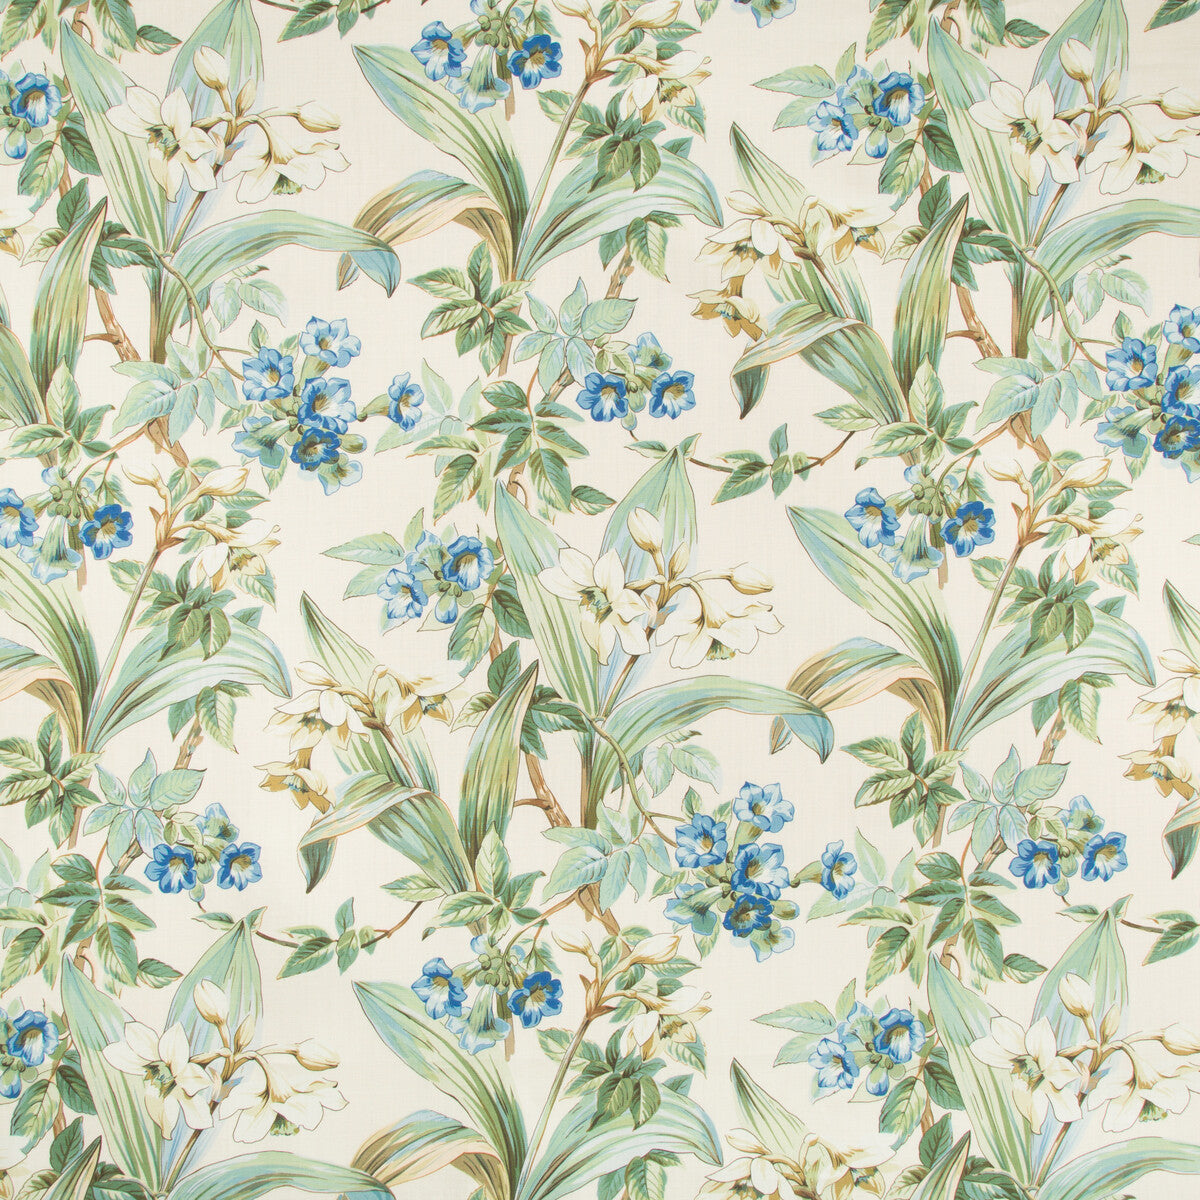 Daffodil And VIne fabric in blue color - pattern 8018117.5.0 - by Brunschwig &amp; Fils in the Cevennes collection